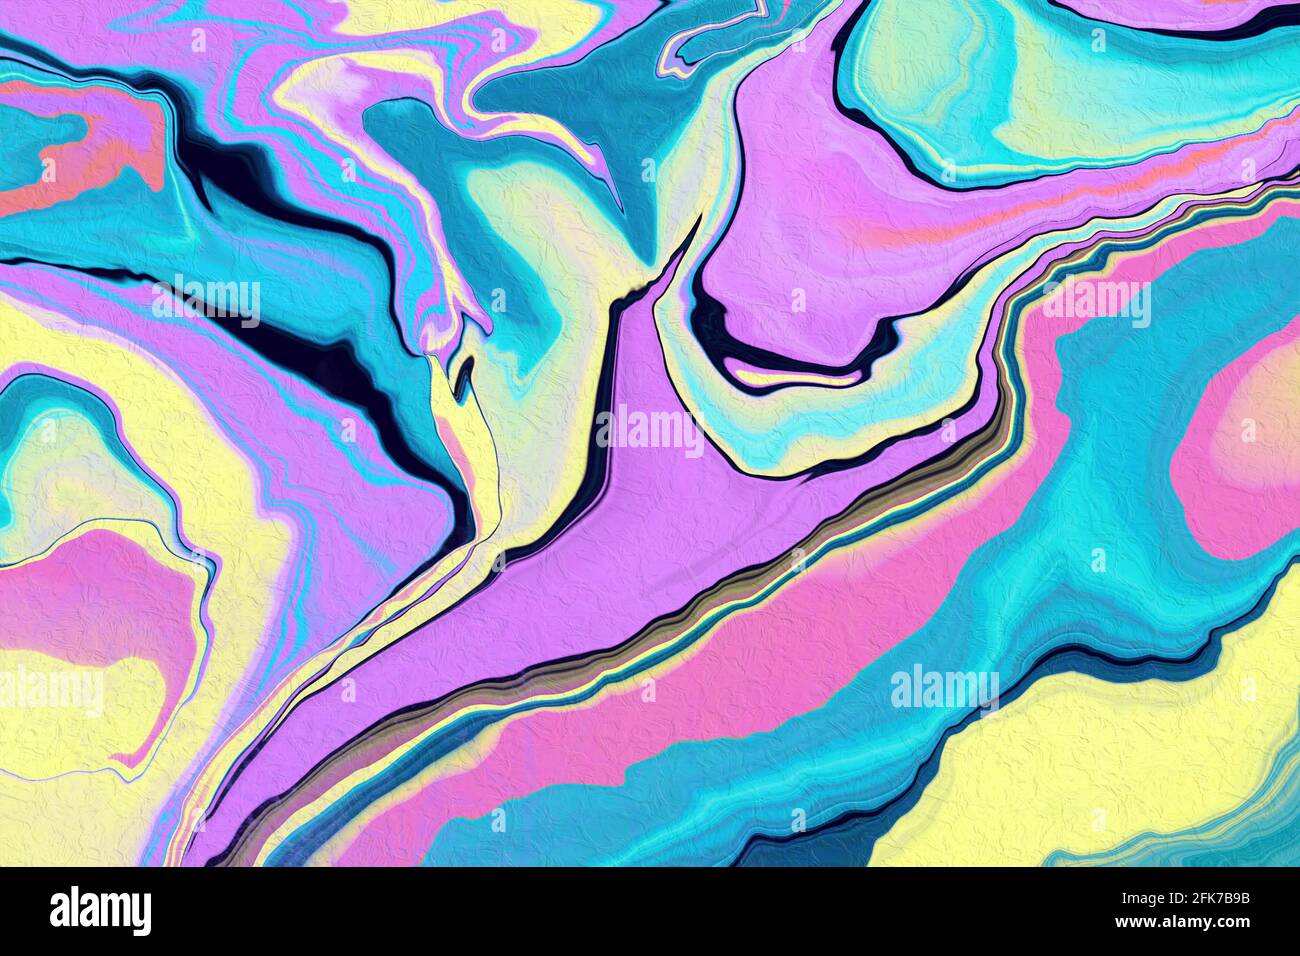 Fluid bstract background Stock Photo